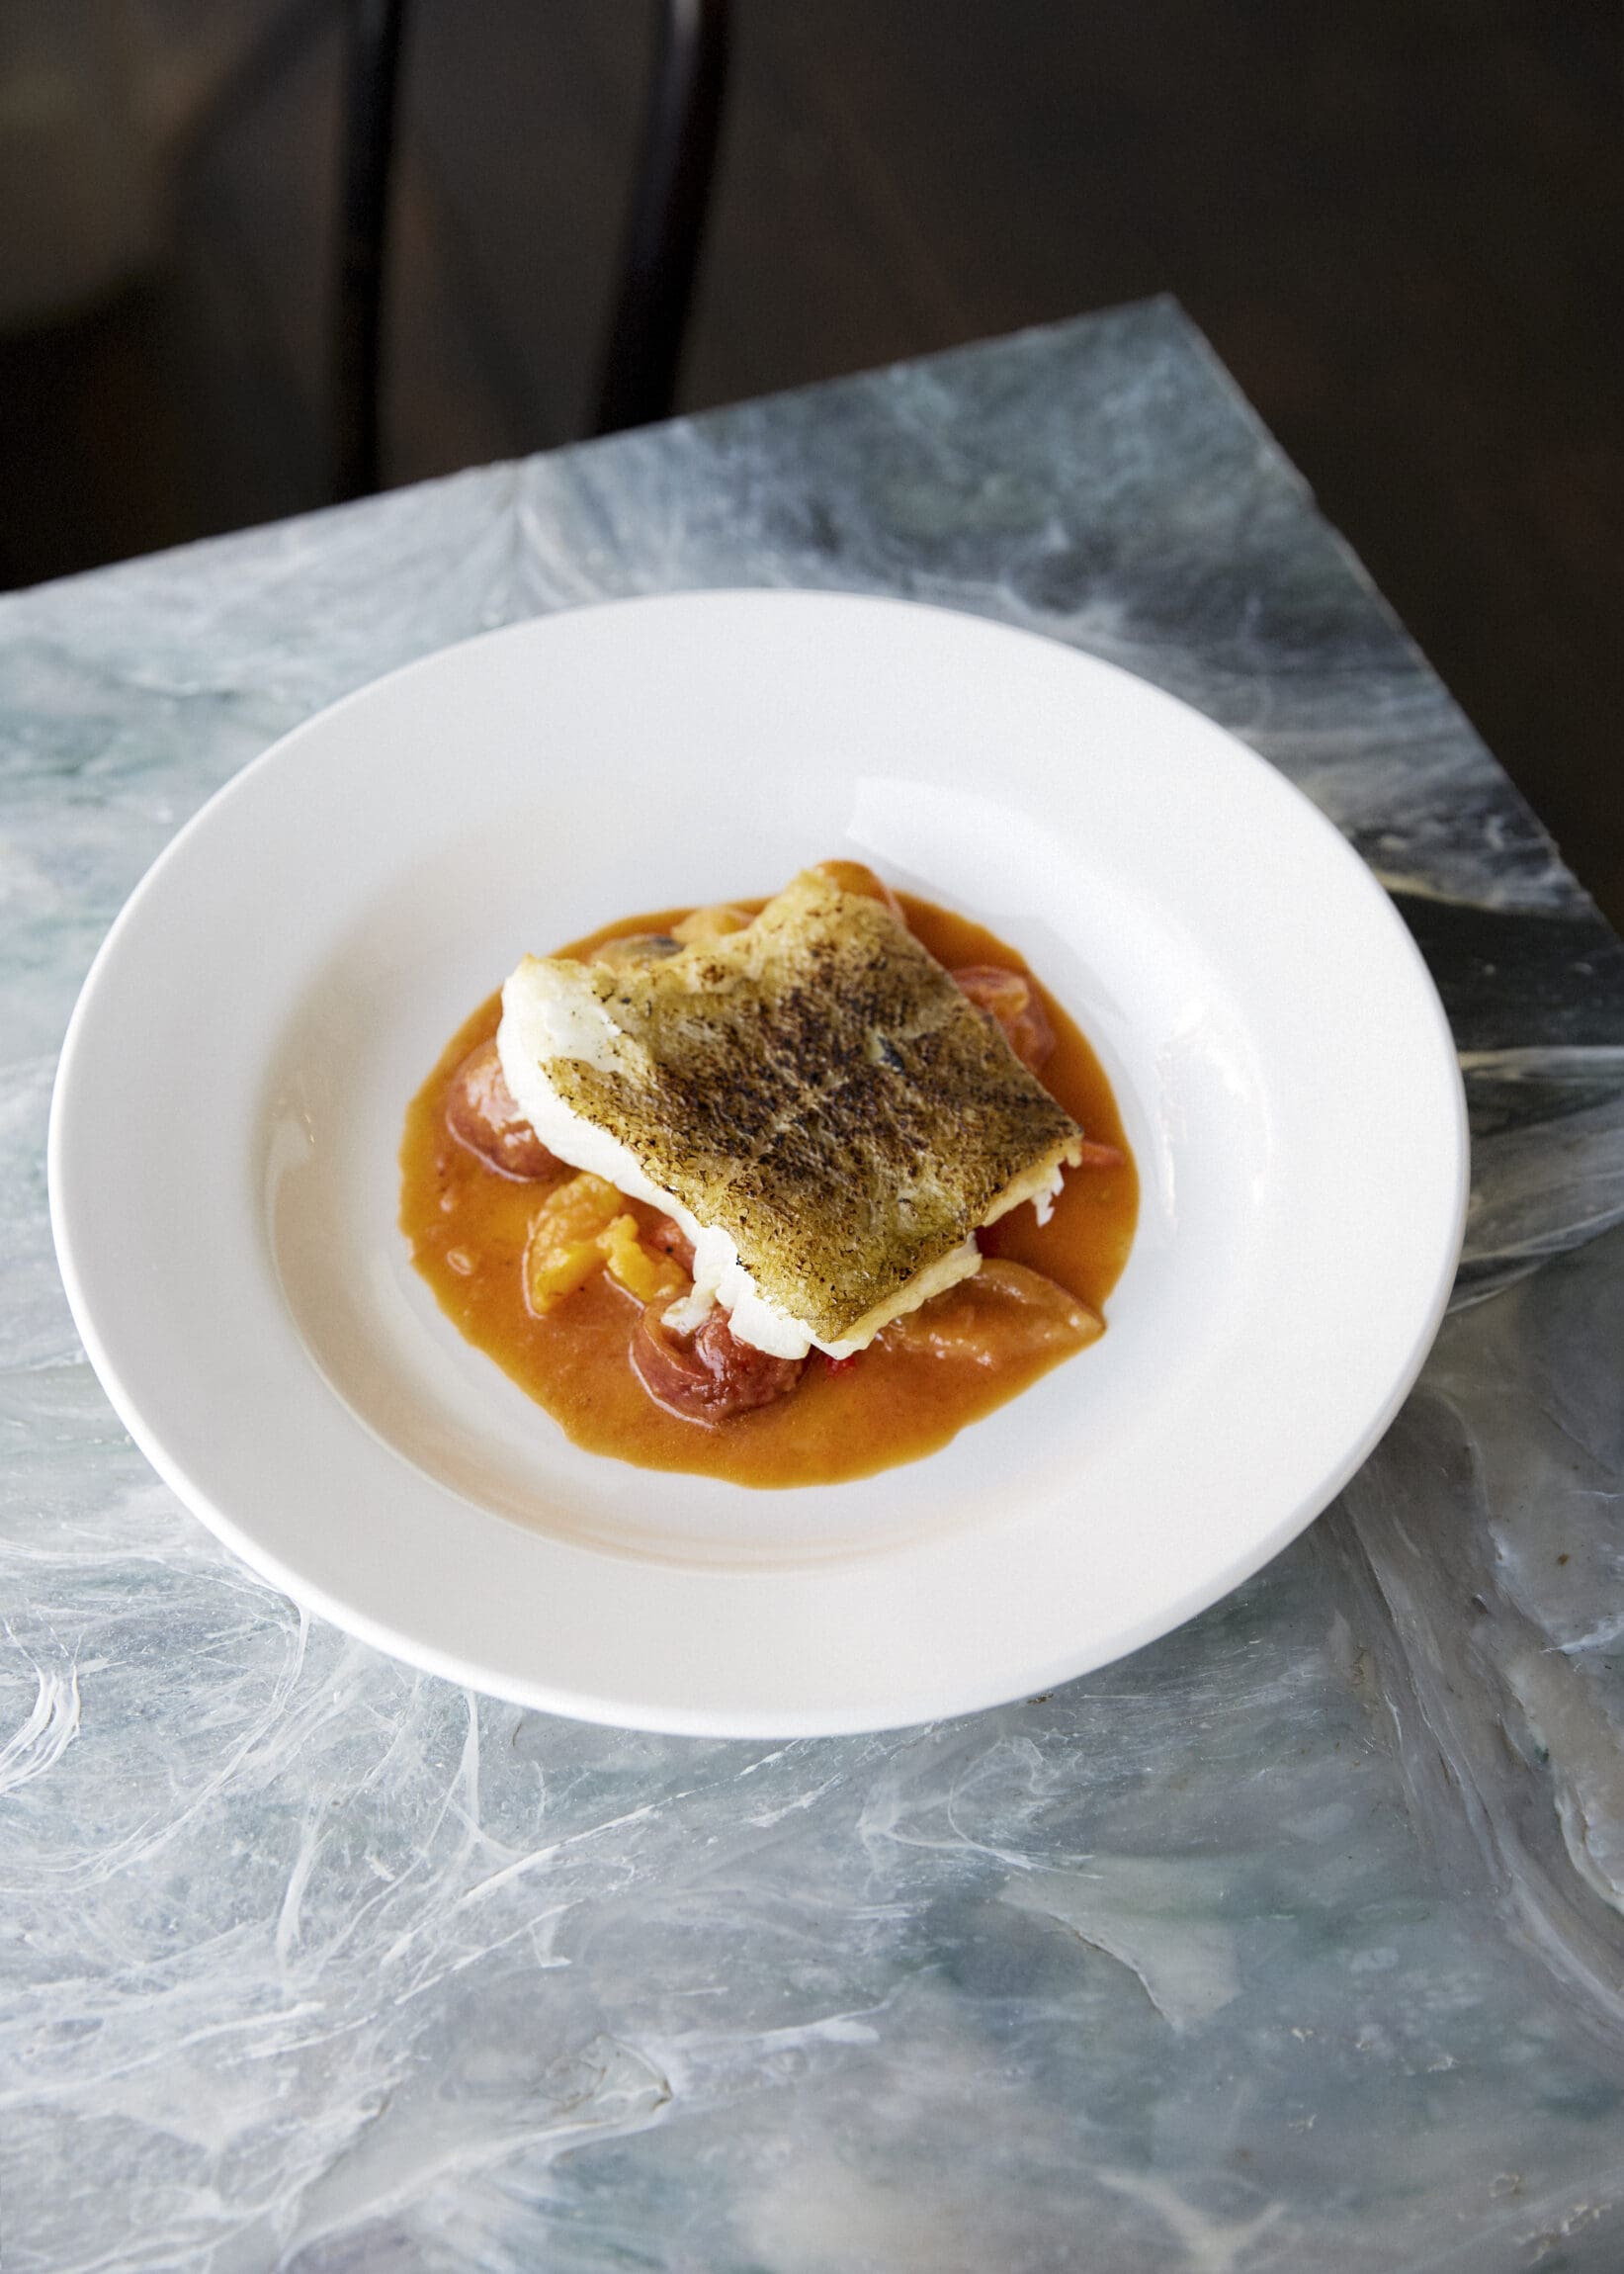 A weekend guide to Margate | Hake and tomatoes served at seafood restaurant Angela's